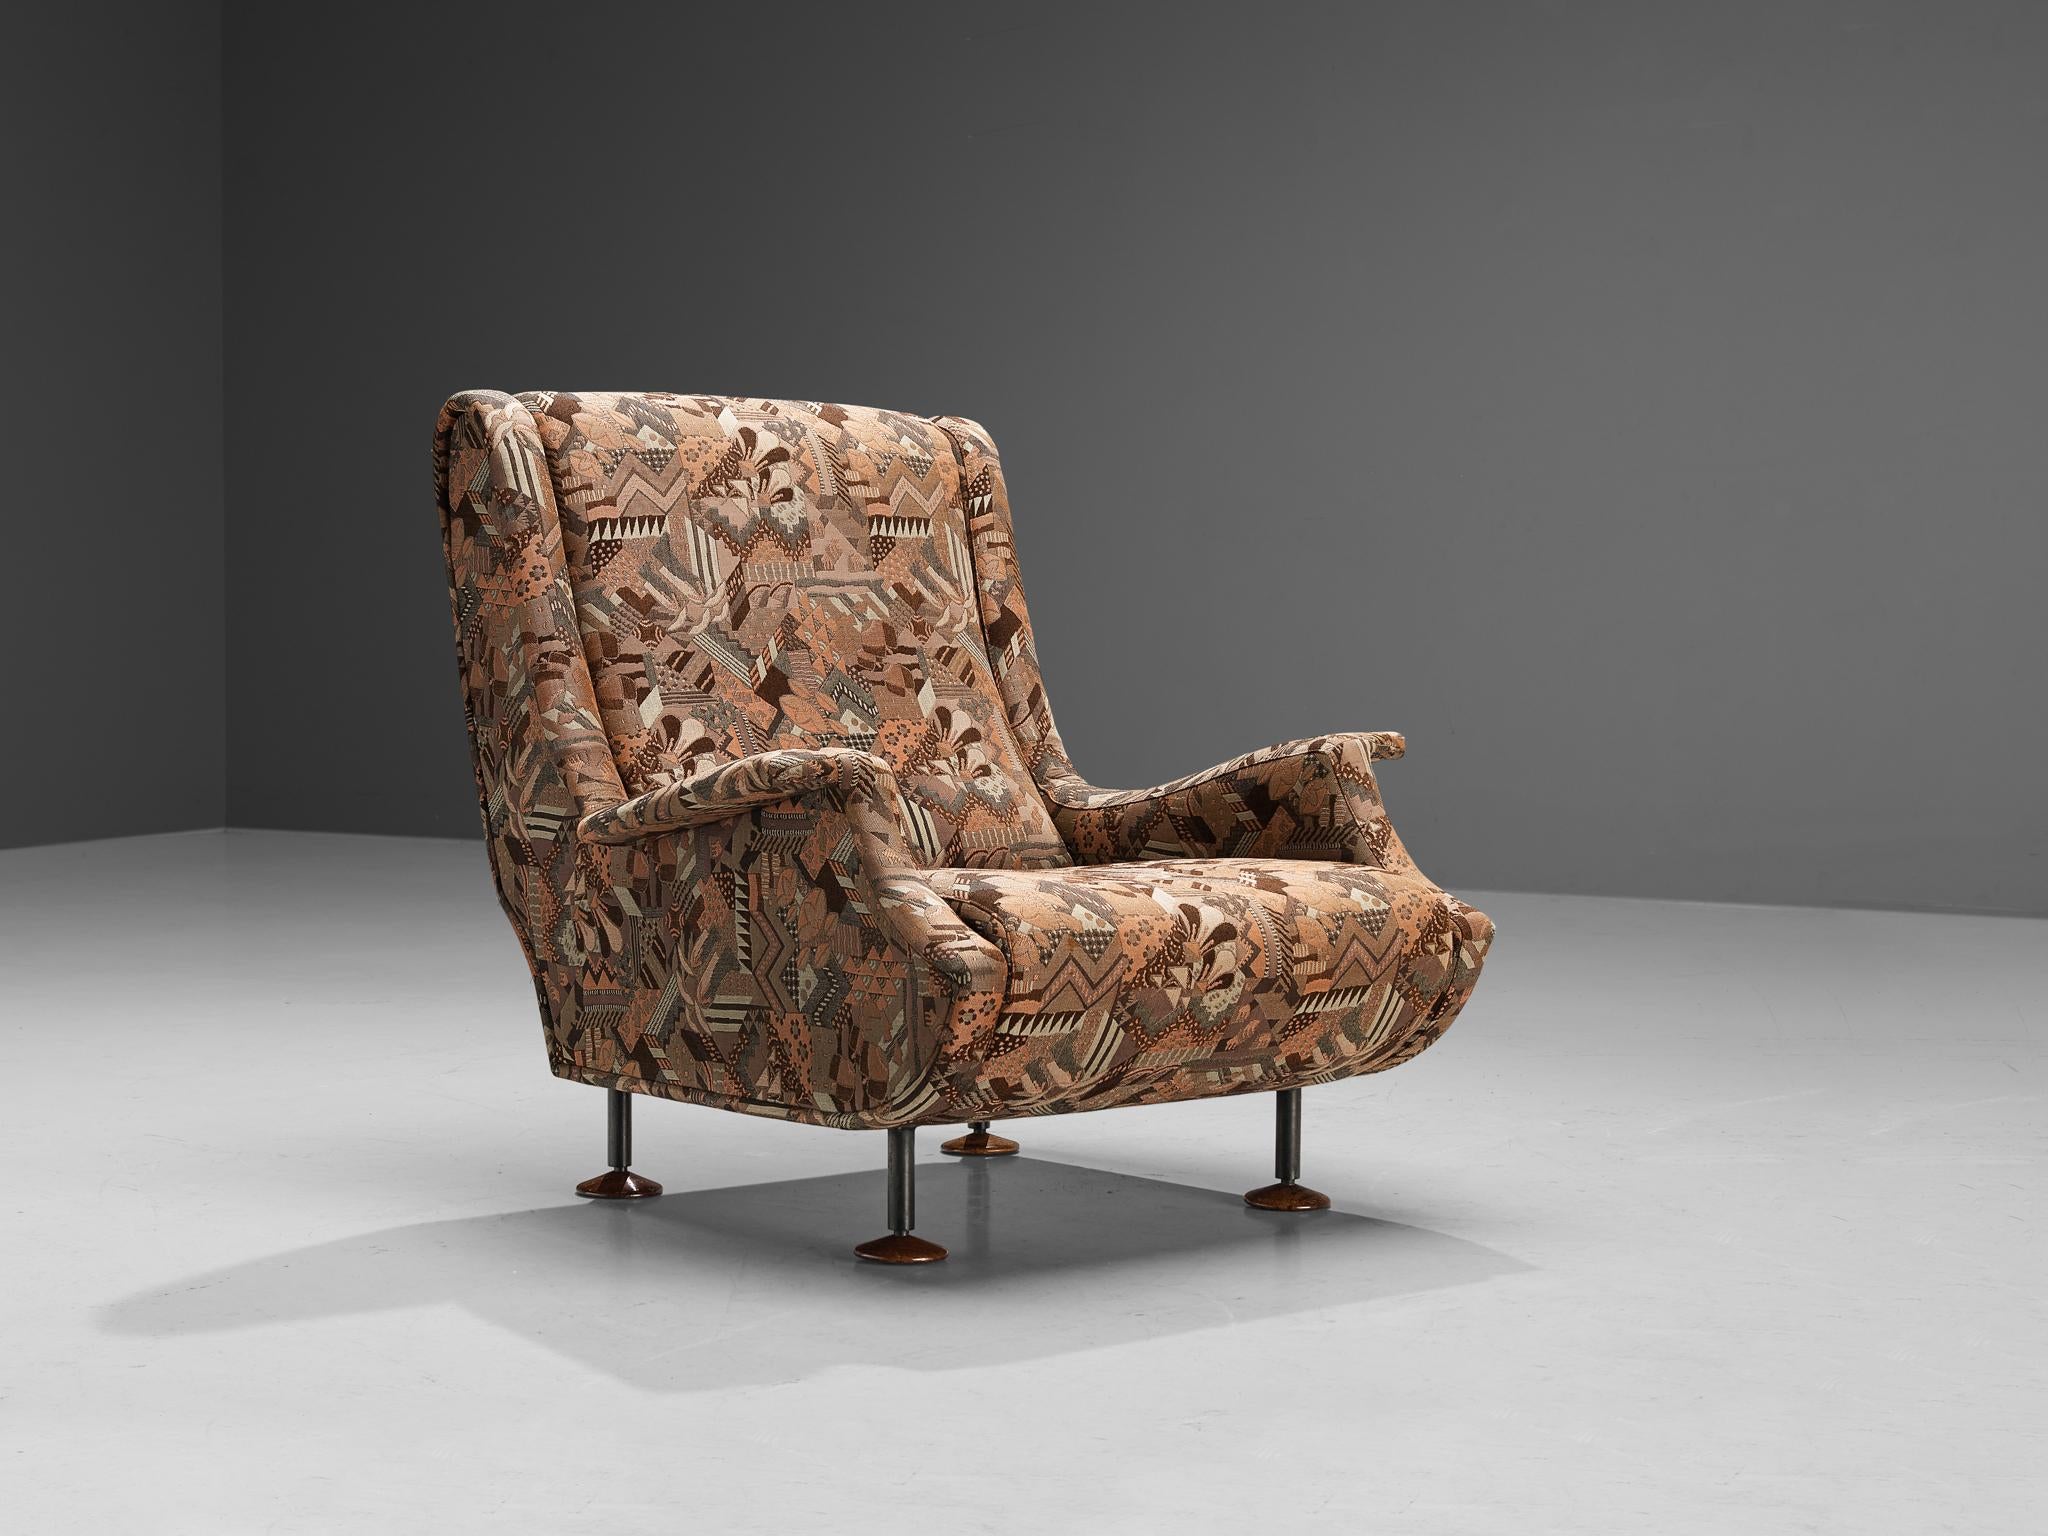 Marco Zanuso for Arflex 'Regent' Lounge Chair in Patterned Upholstery